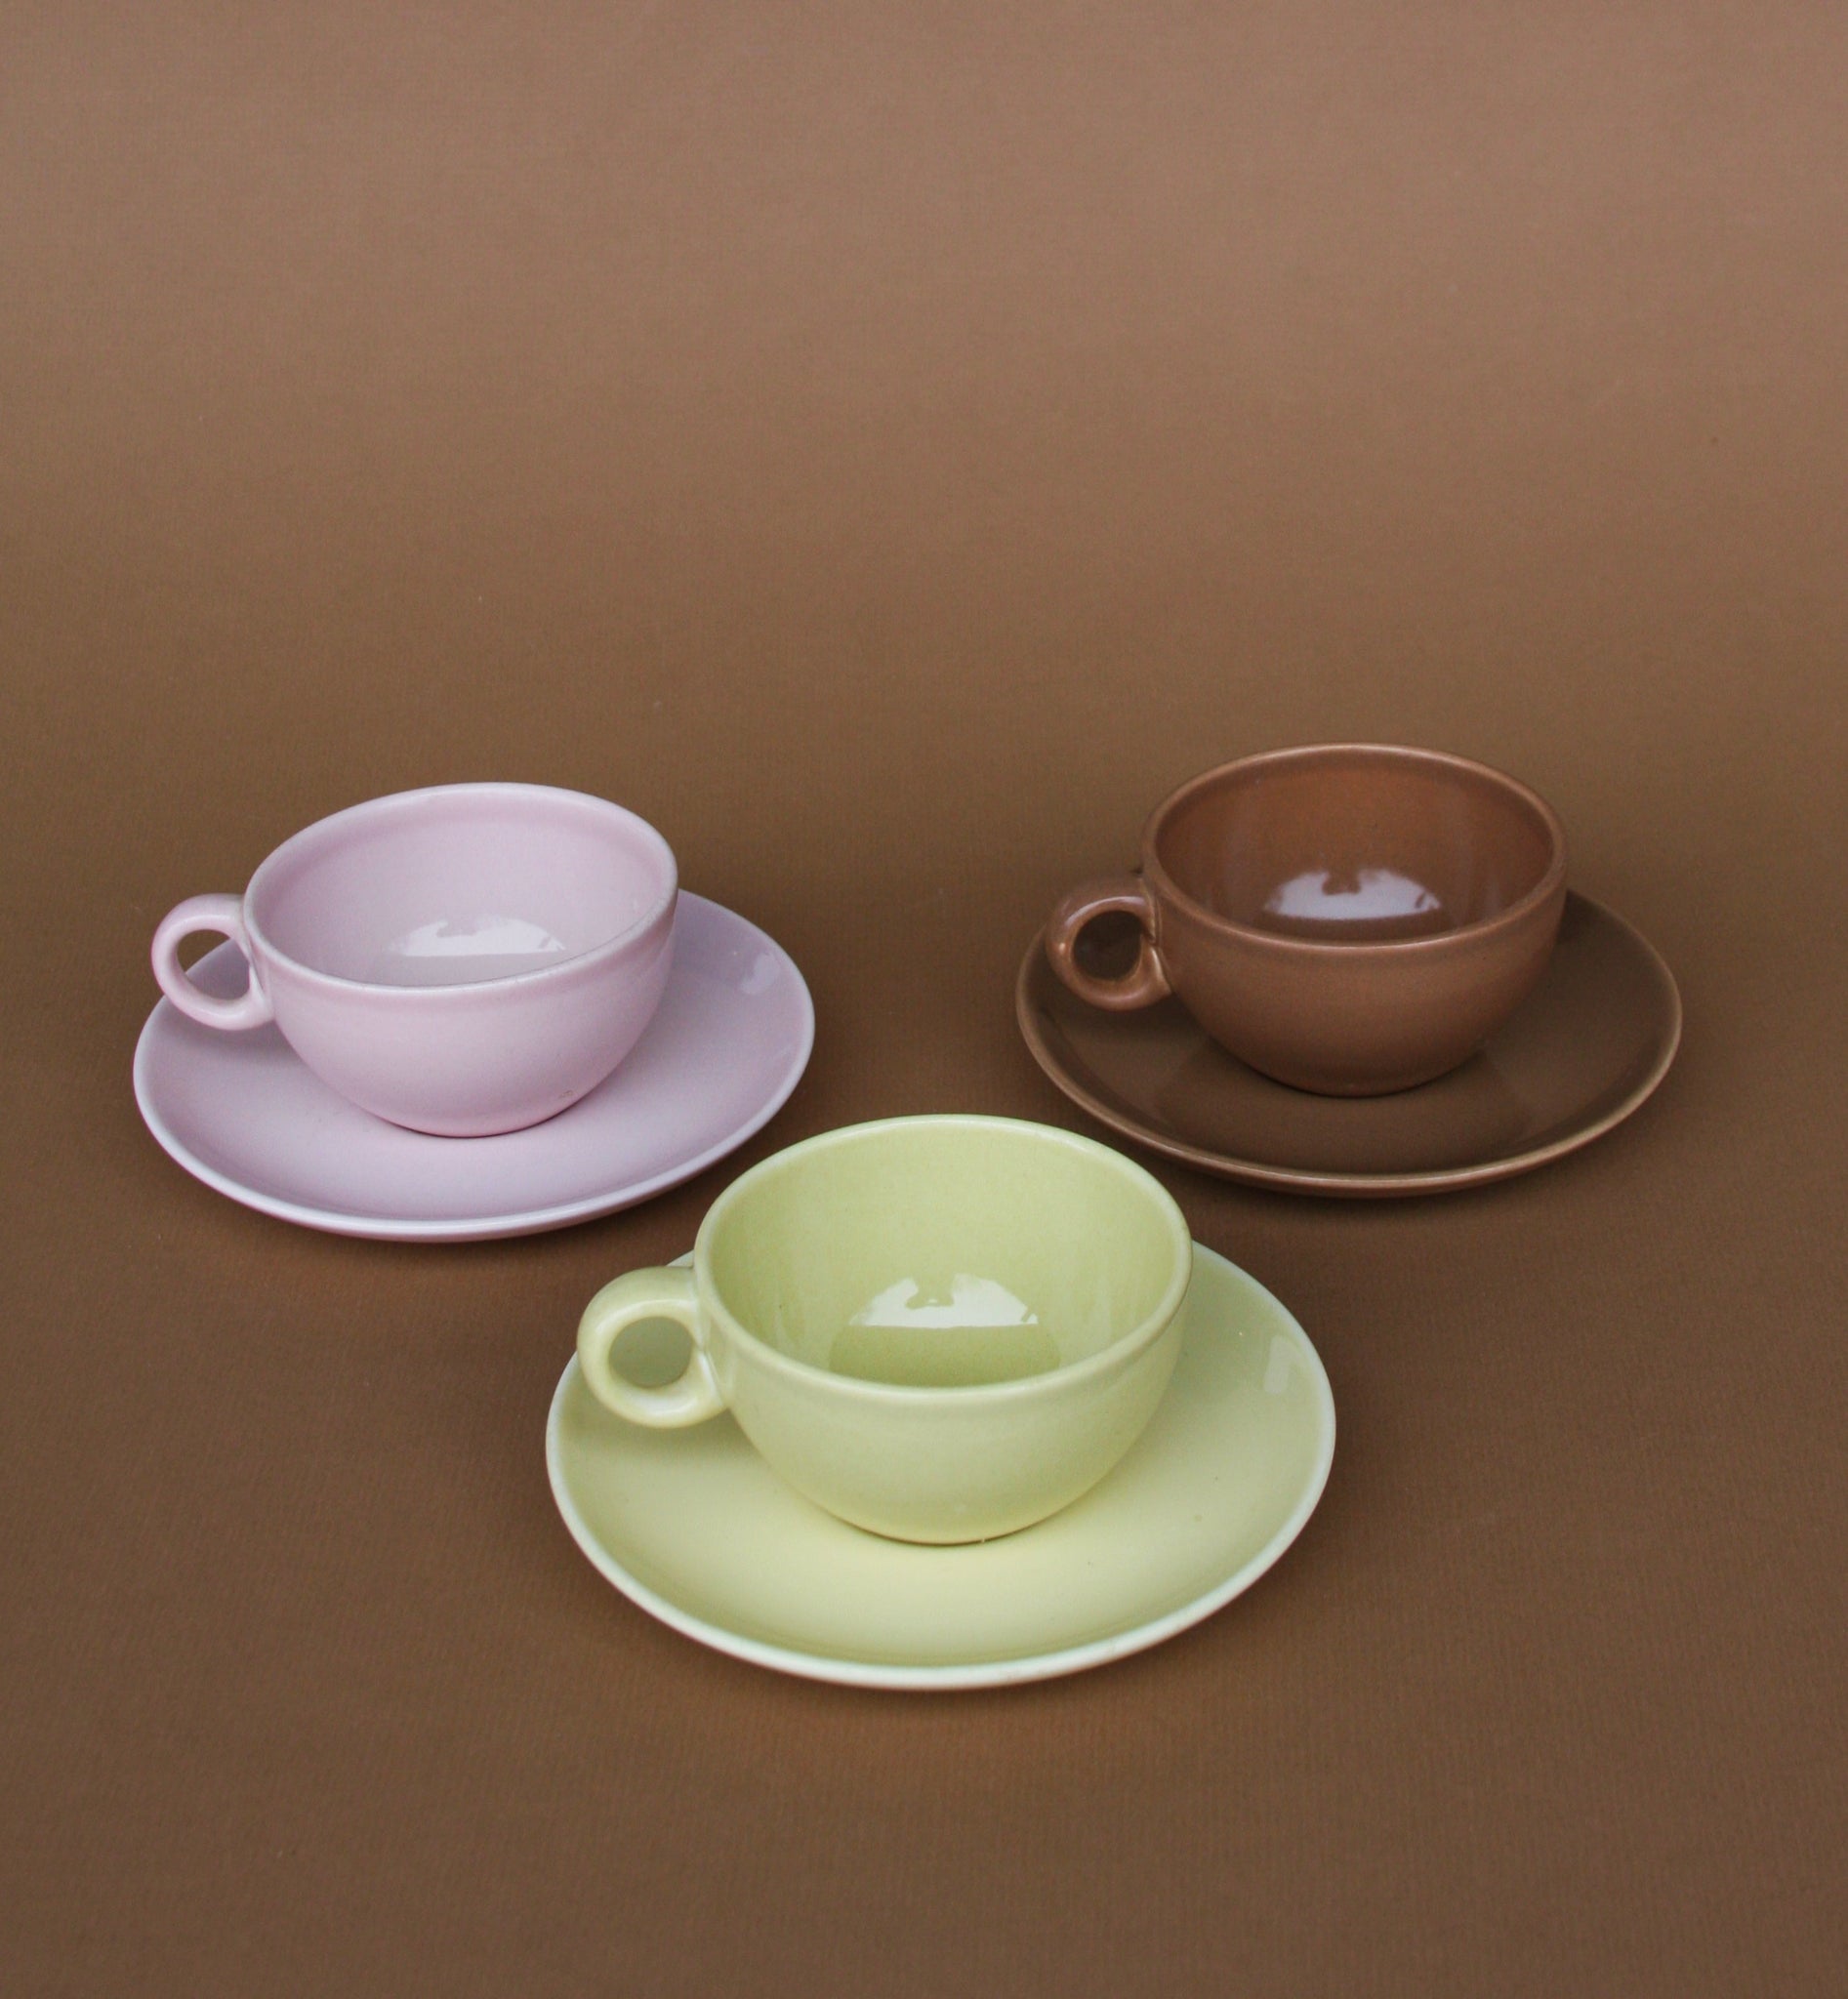 Set of 3 Neapolitan Tea or Coffee Cups and Saucer